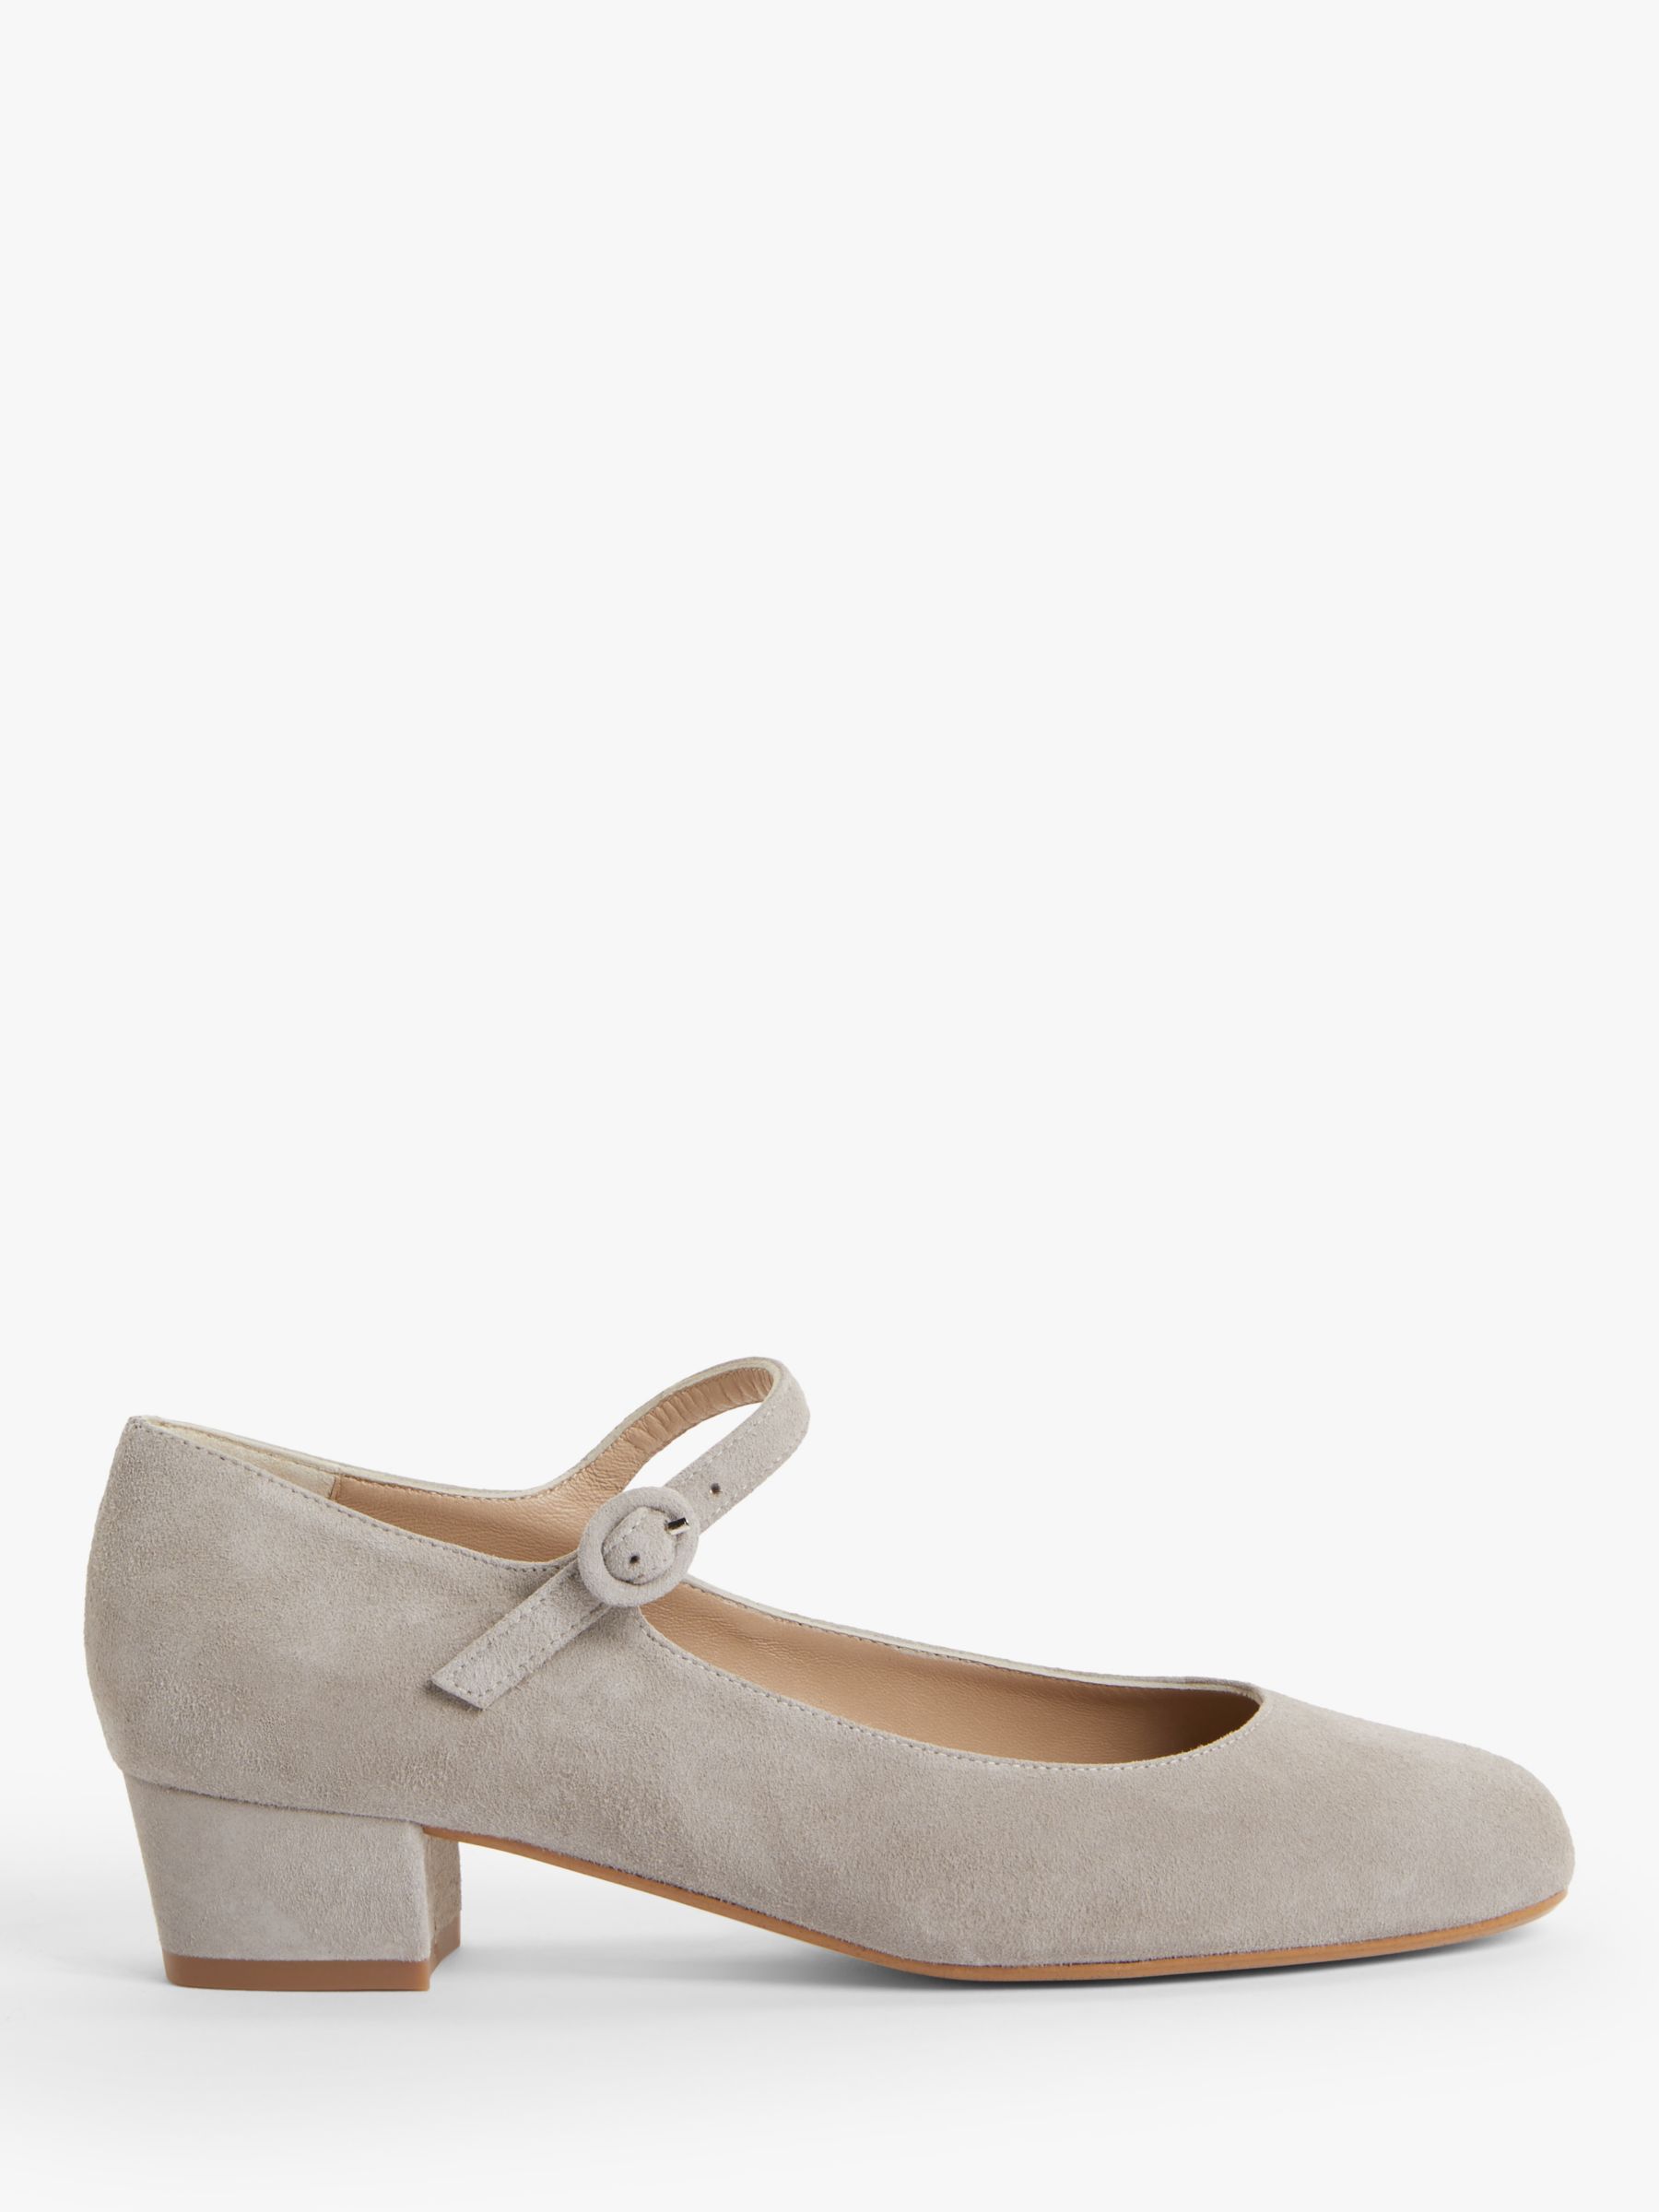 John Lewis & Partners Adora Suede Mary Jane Court Shoes, Grey